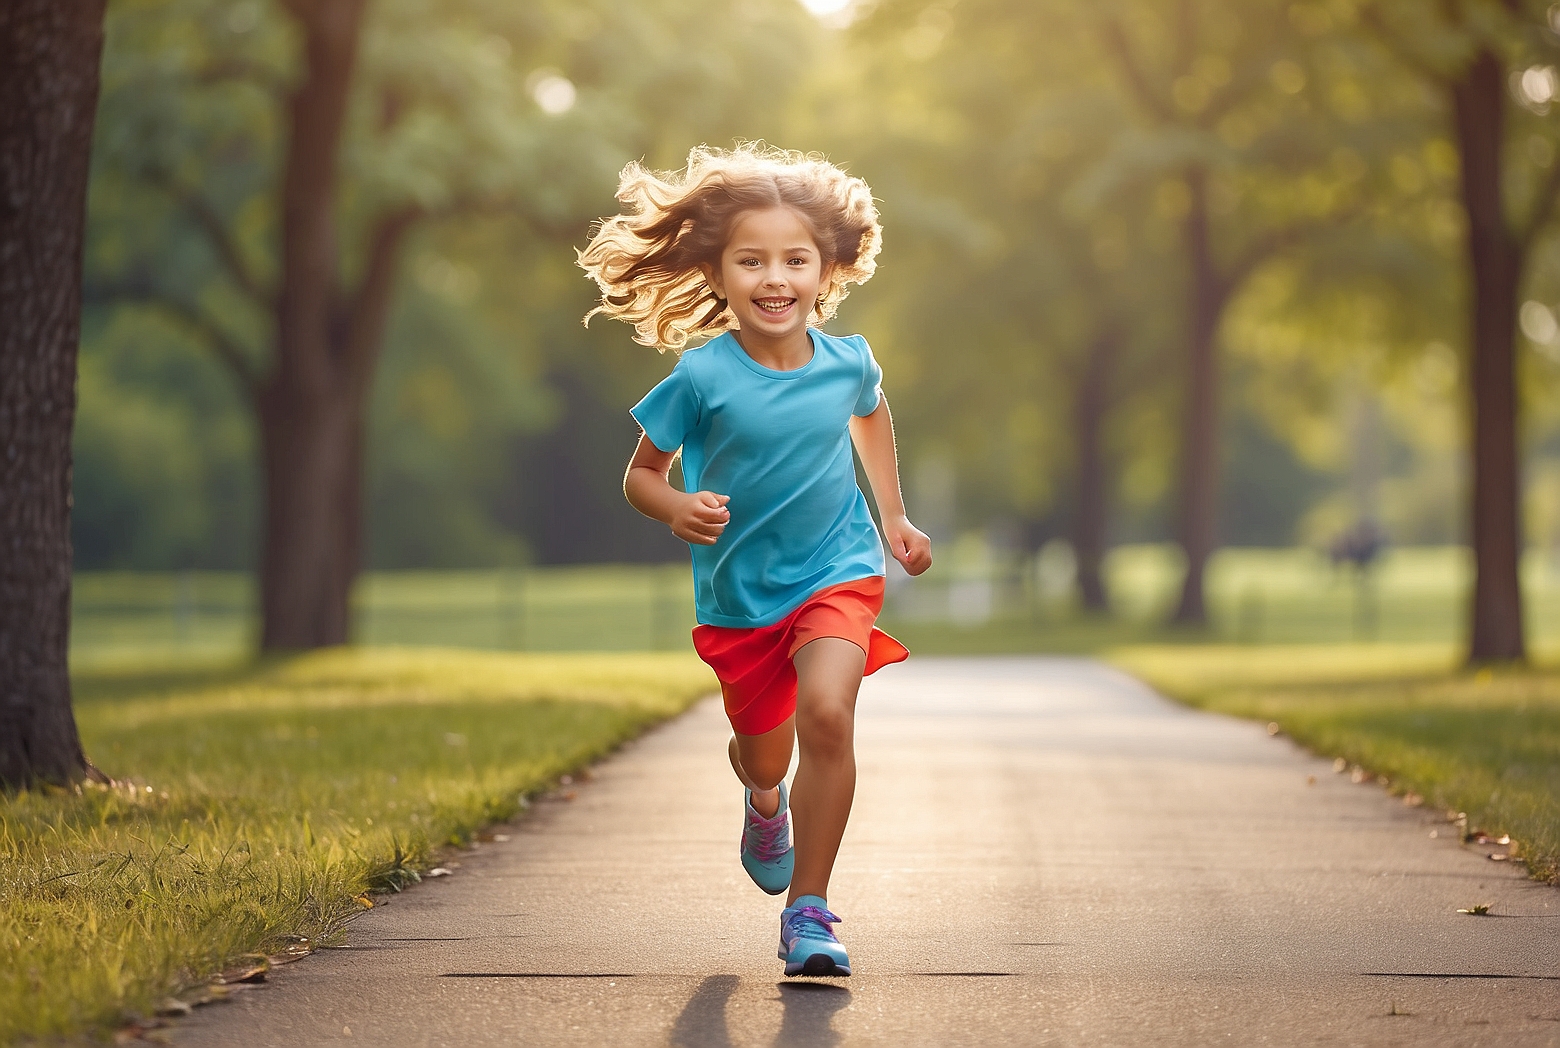 How to Improve Your Child’s Running Speed